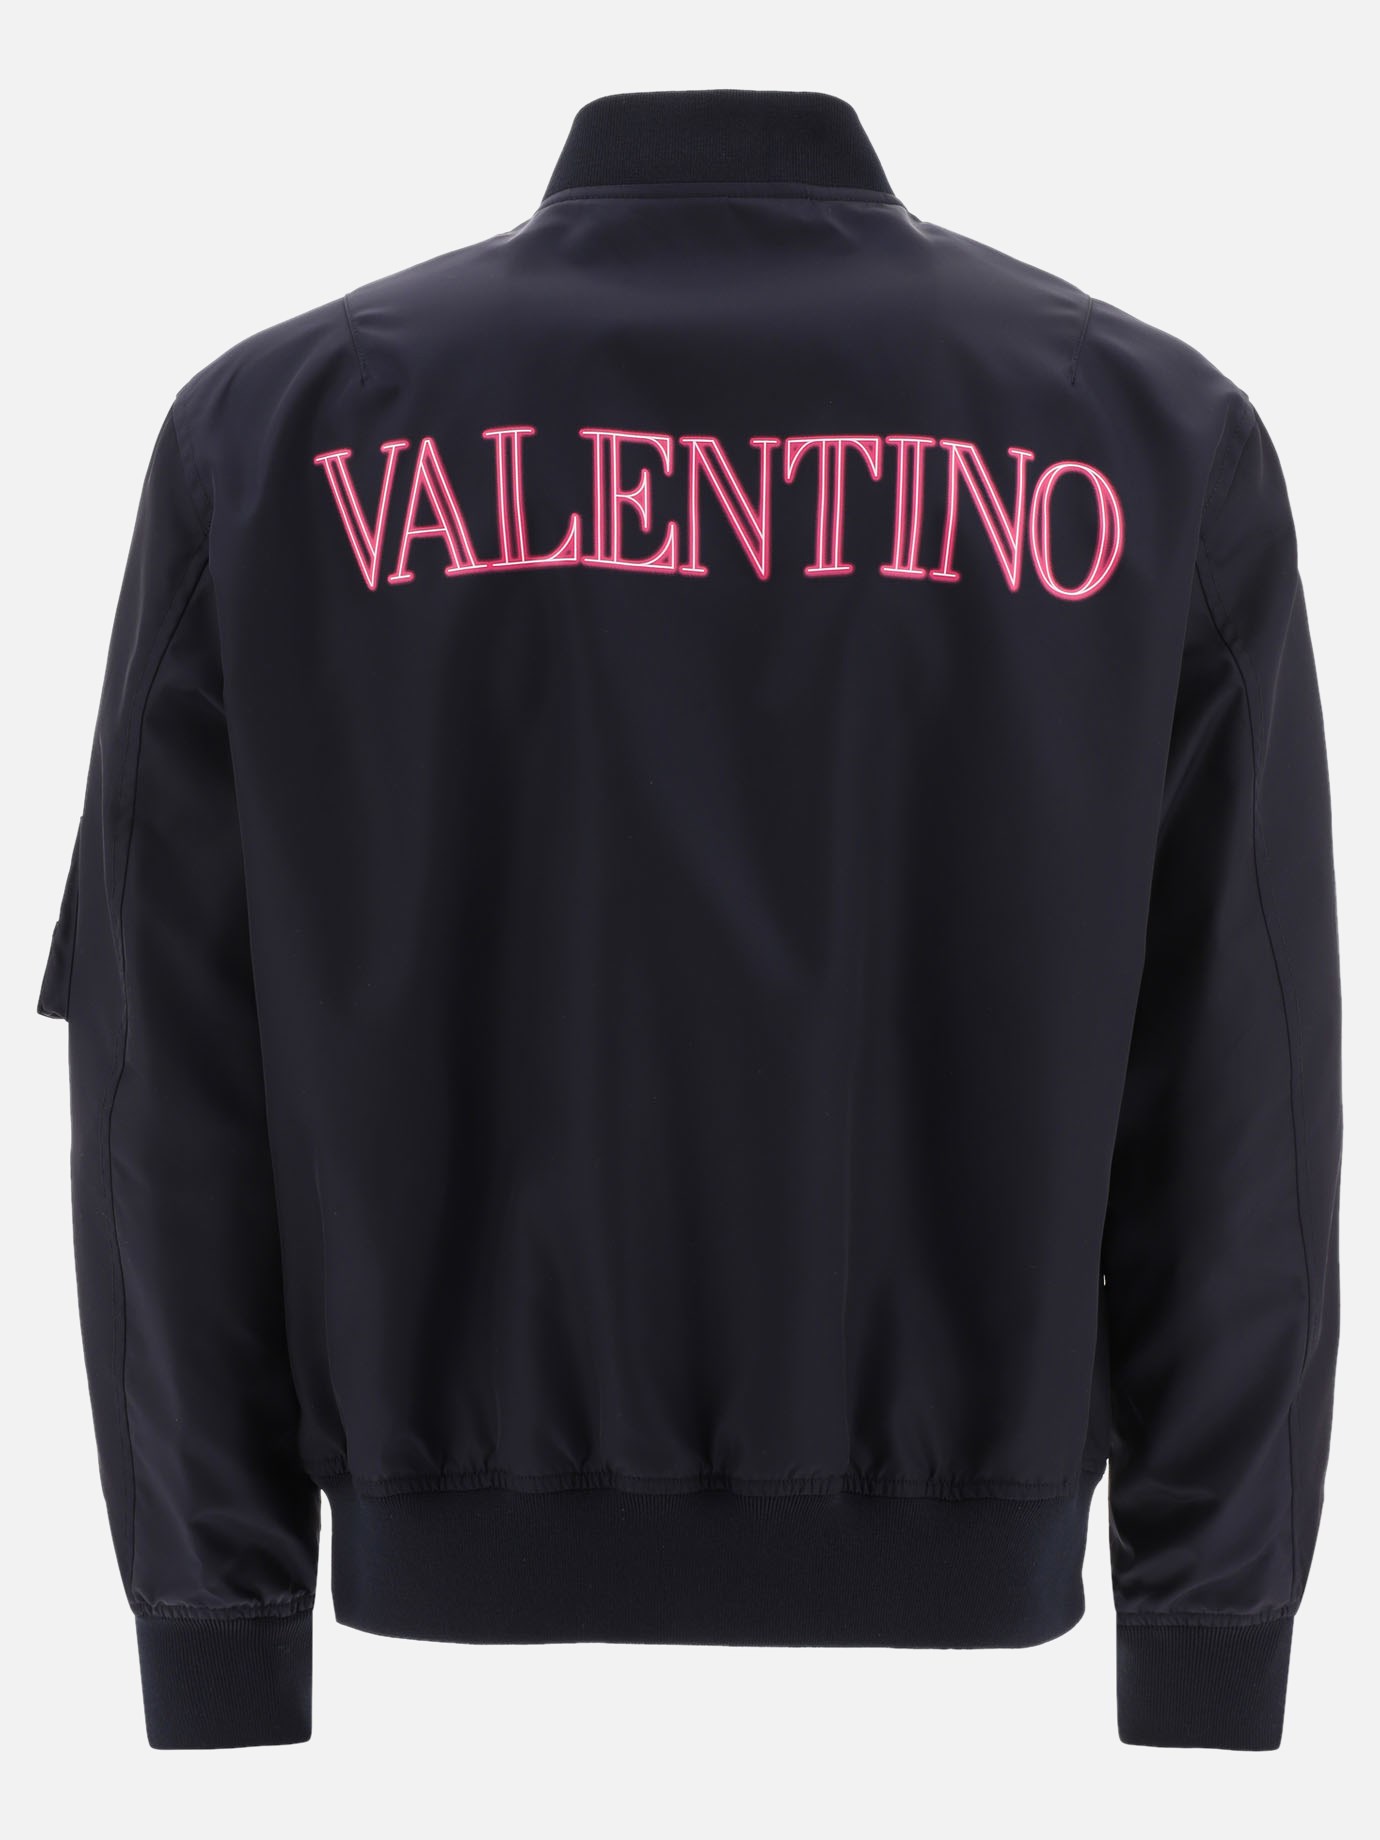  Neon Universe  bomber jacket by Valentino